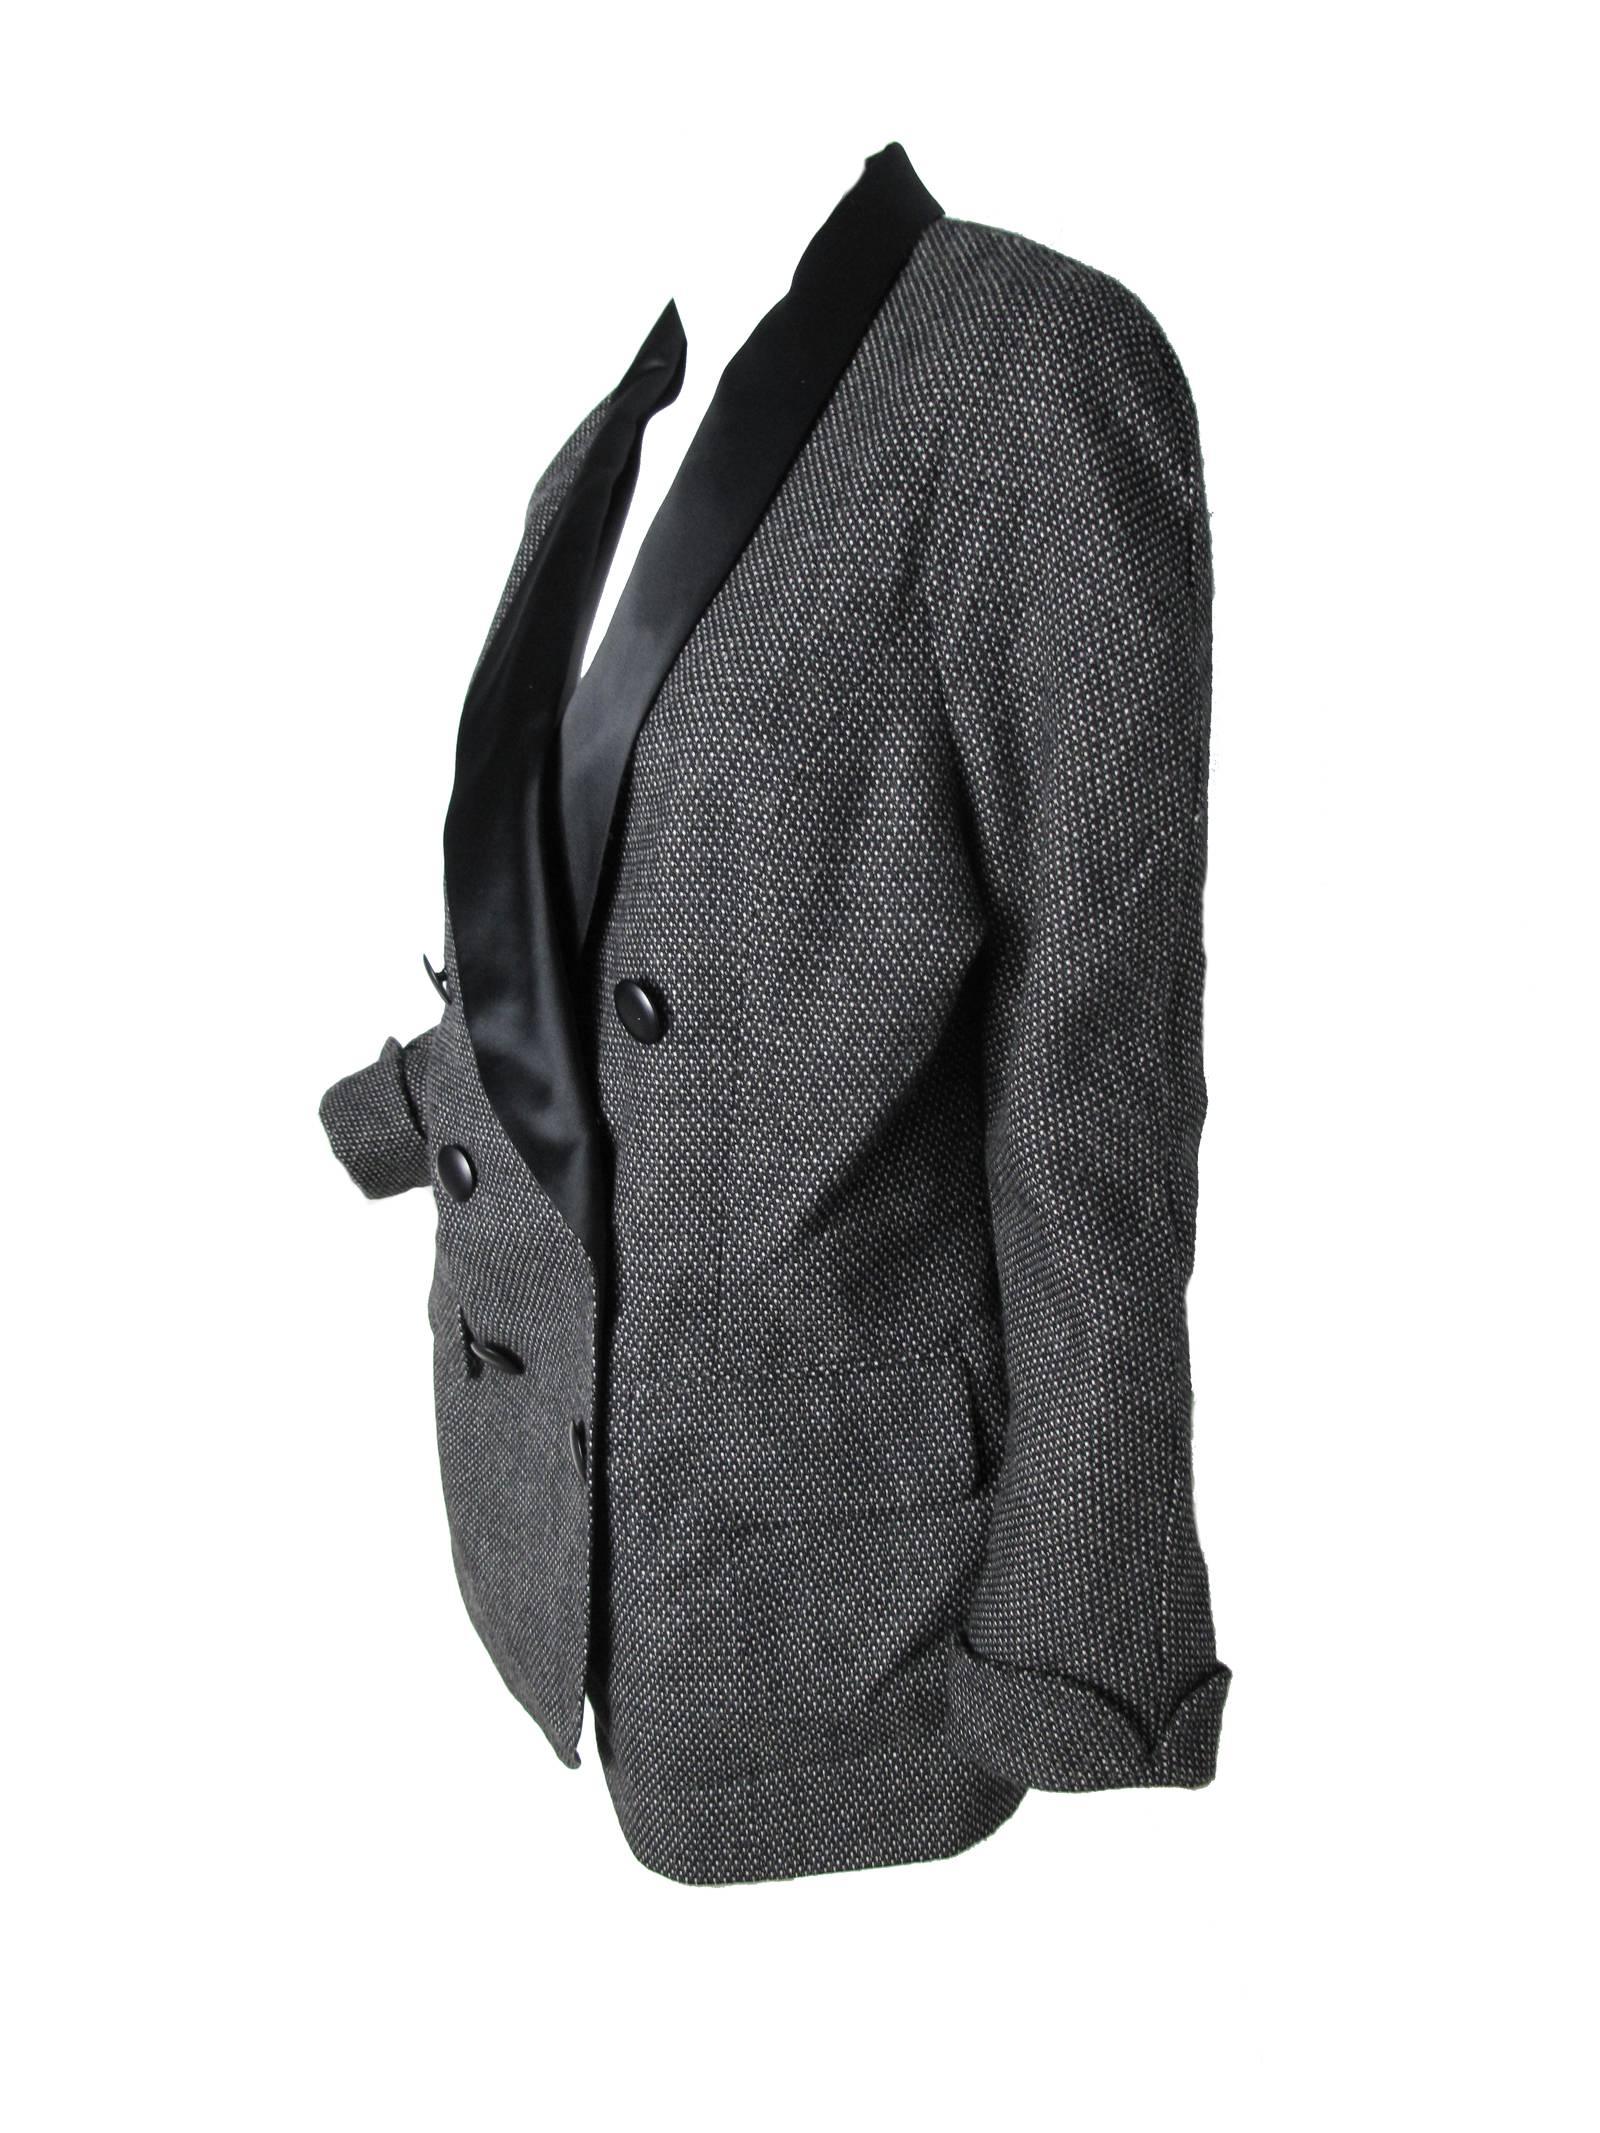 1980s Christian Dior wool tuxedo jacket with satin lapel.  Condition: Excellent. 

Size 10 
40